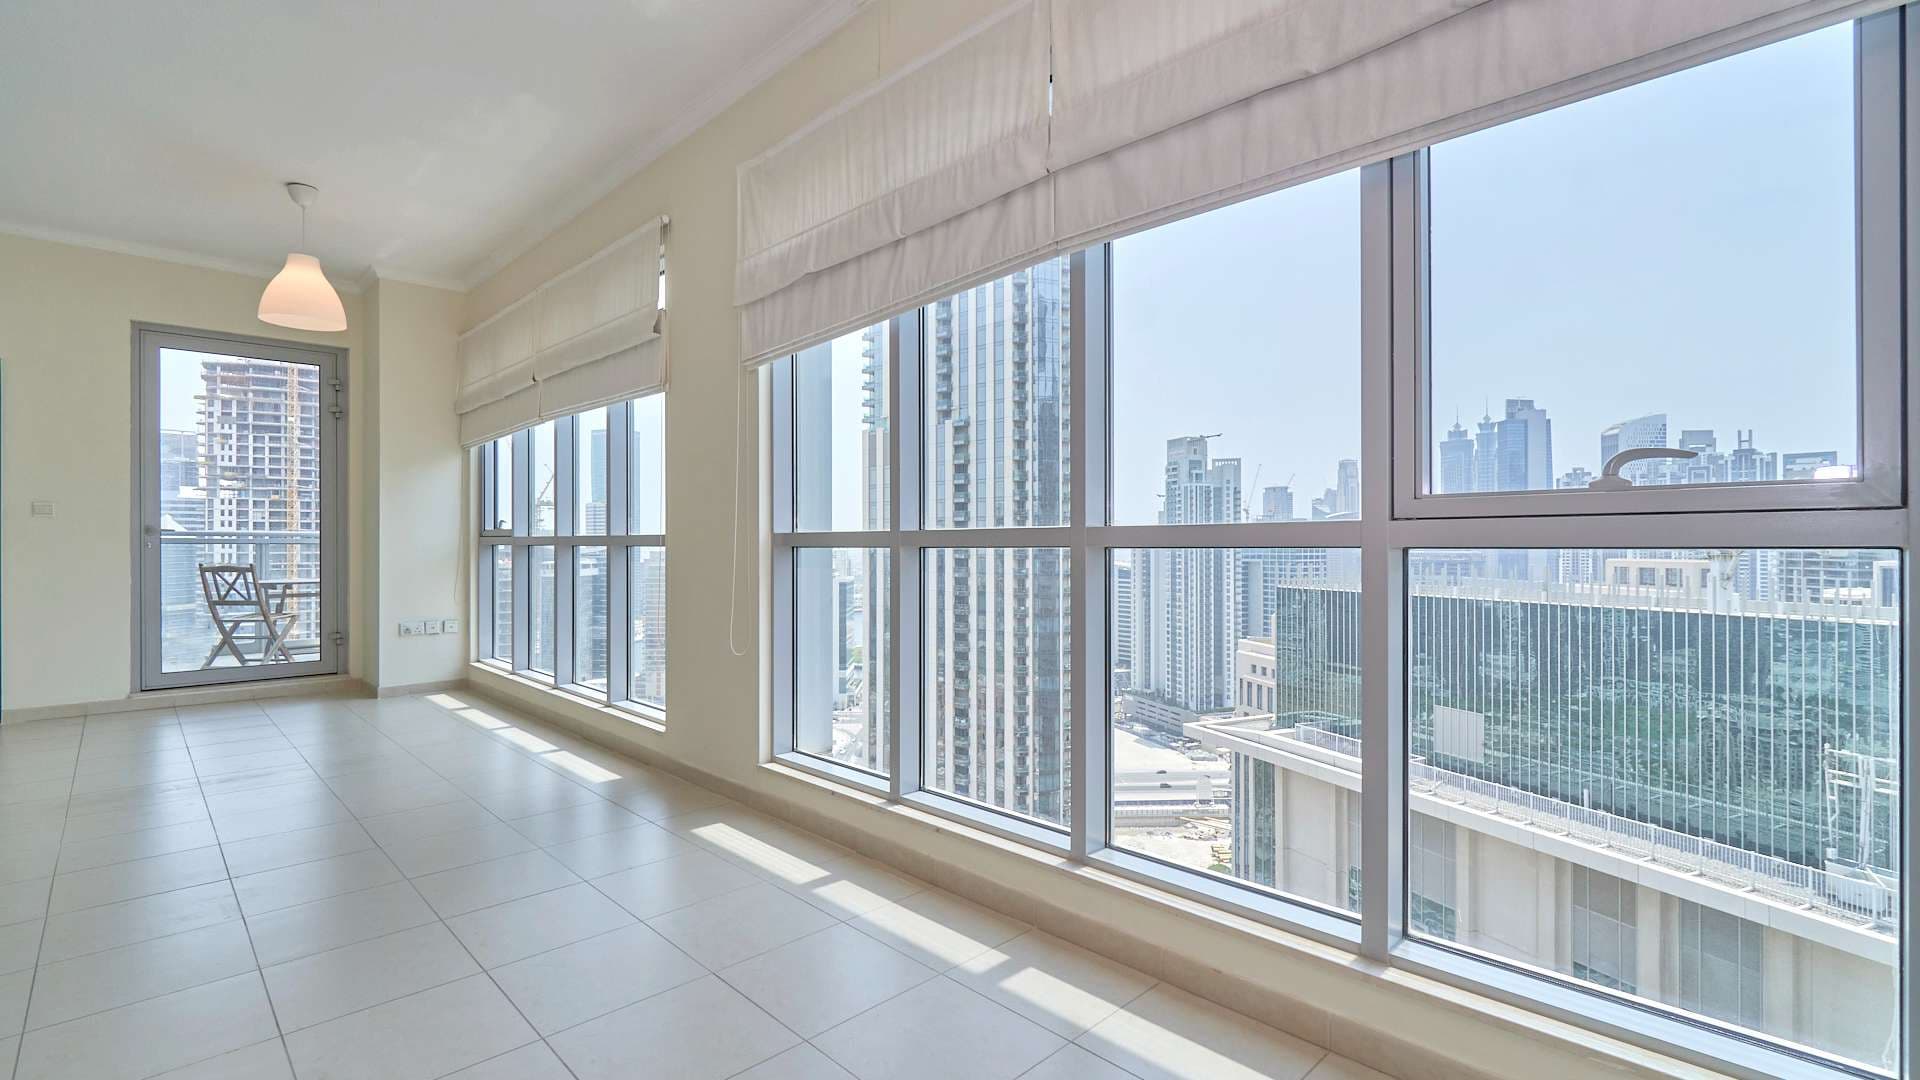 1 Bedroom Apartment For Rent The Residences Lp11596 93563bfd769d180.jpg